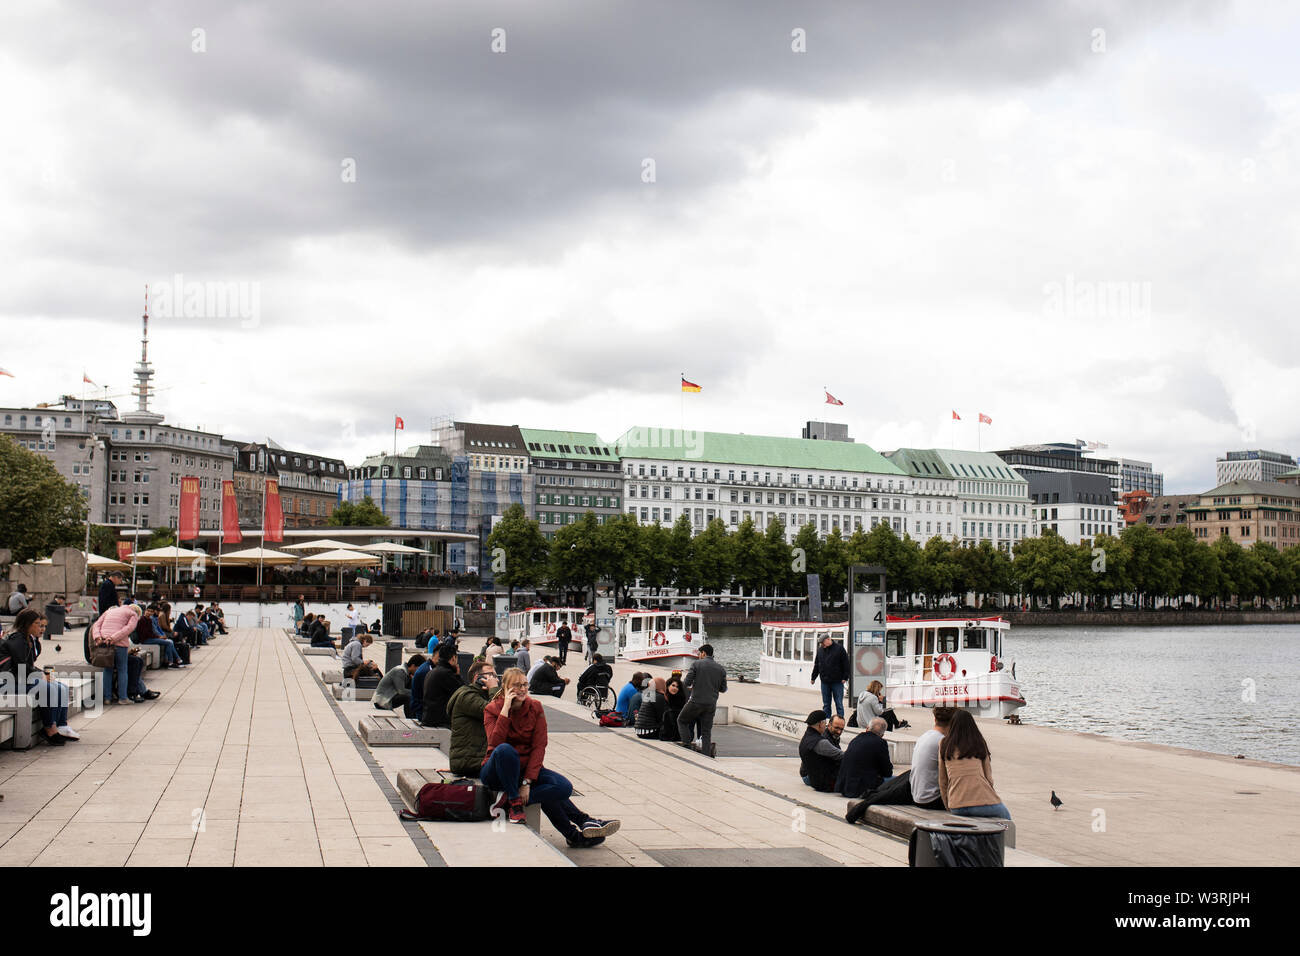 People gather along the Binnenalster, a manmade lake in the center of Hamburg, Germany, fed by the Alster River, where tour boats dock at the terrace. Stock Photo